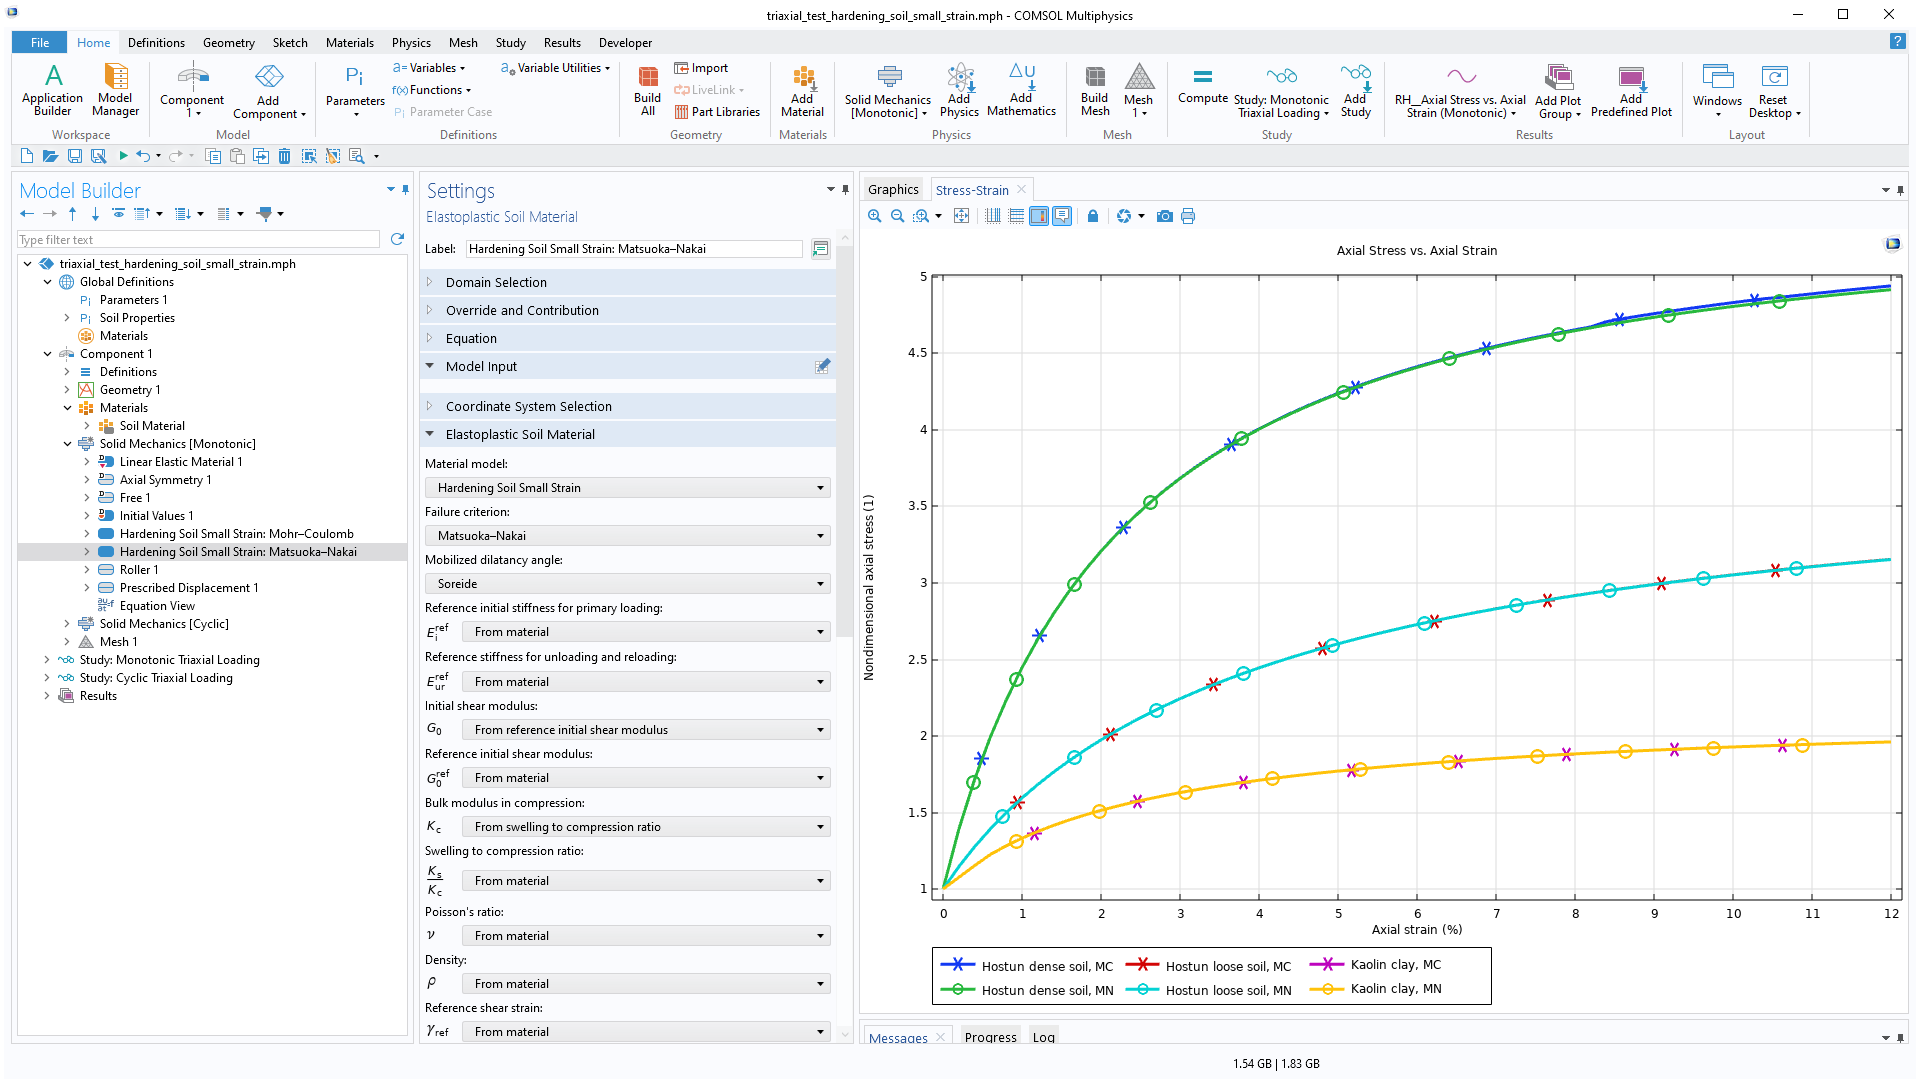 The COMSOL Multiphysics UI showing the Model Builder with the Elastoplastic Soil Material node highlighted, the corresponding Settings window, and a 1D plot in the Graphics window.